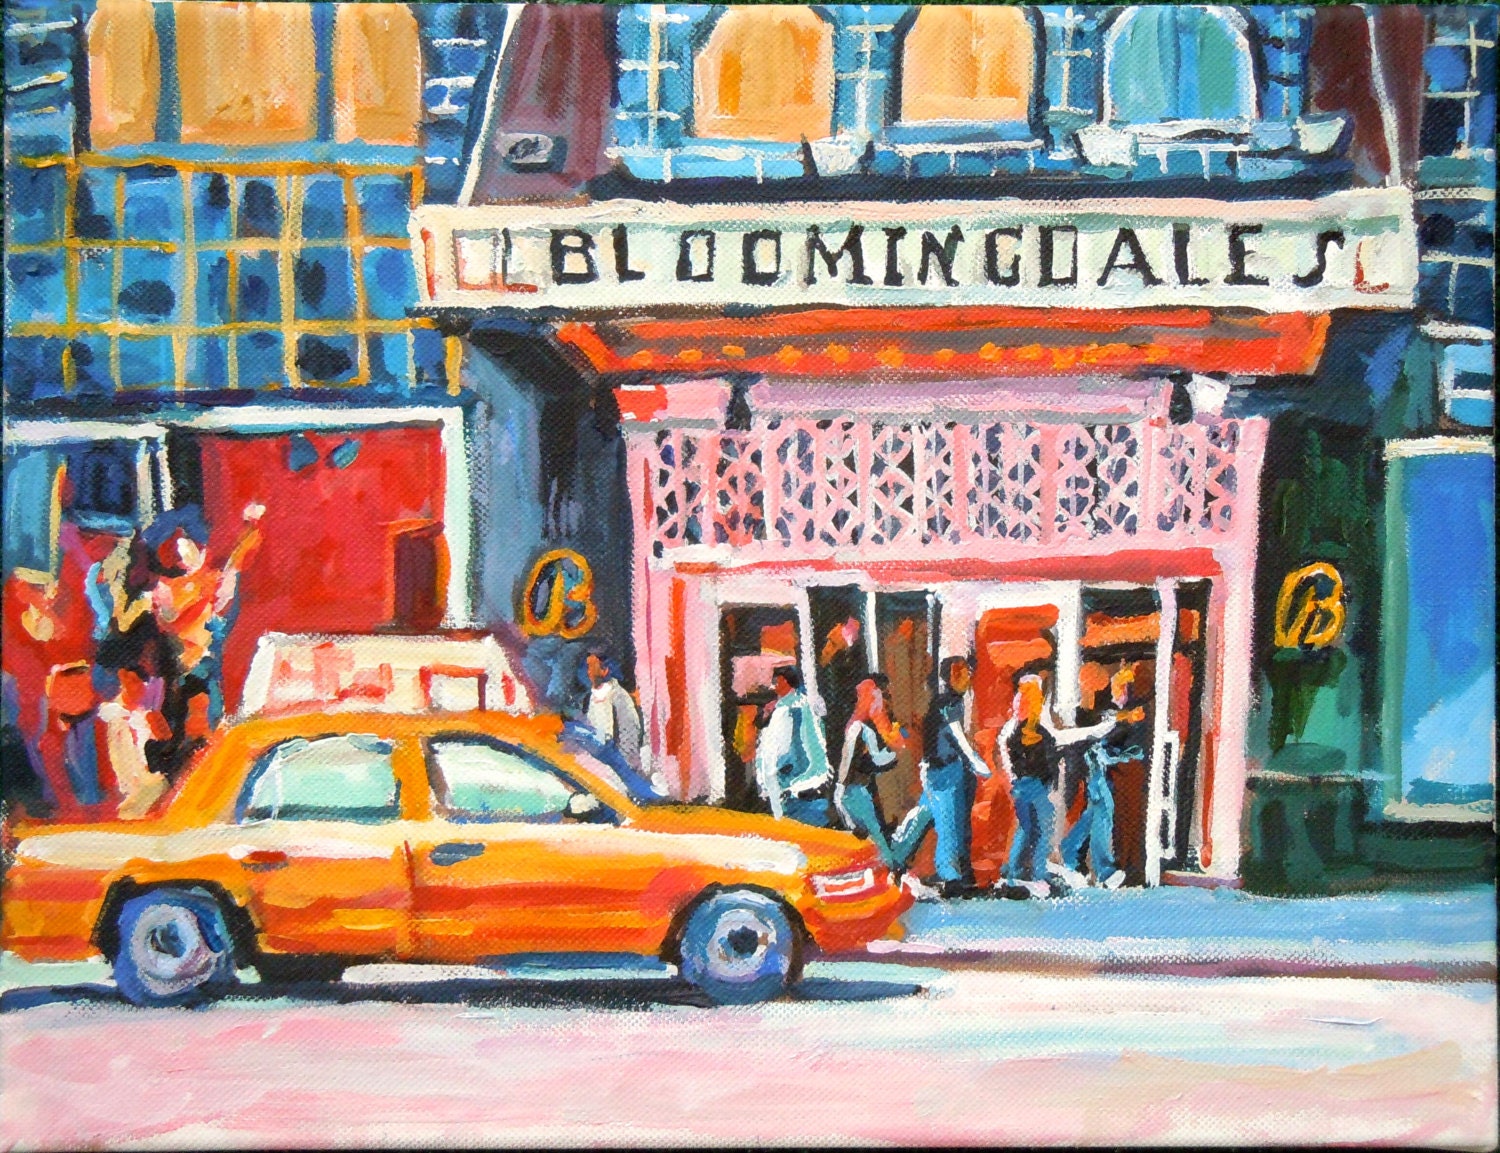 Fine Art Print  8x10, "Bloomingdales" yellow pink blue bloomies Painting by Gwen Meyerson - GwenMeyerson